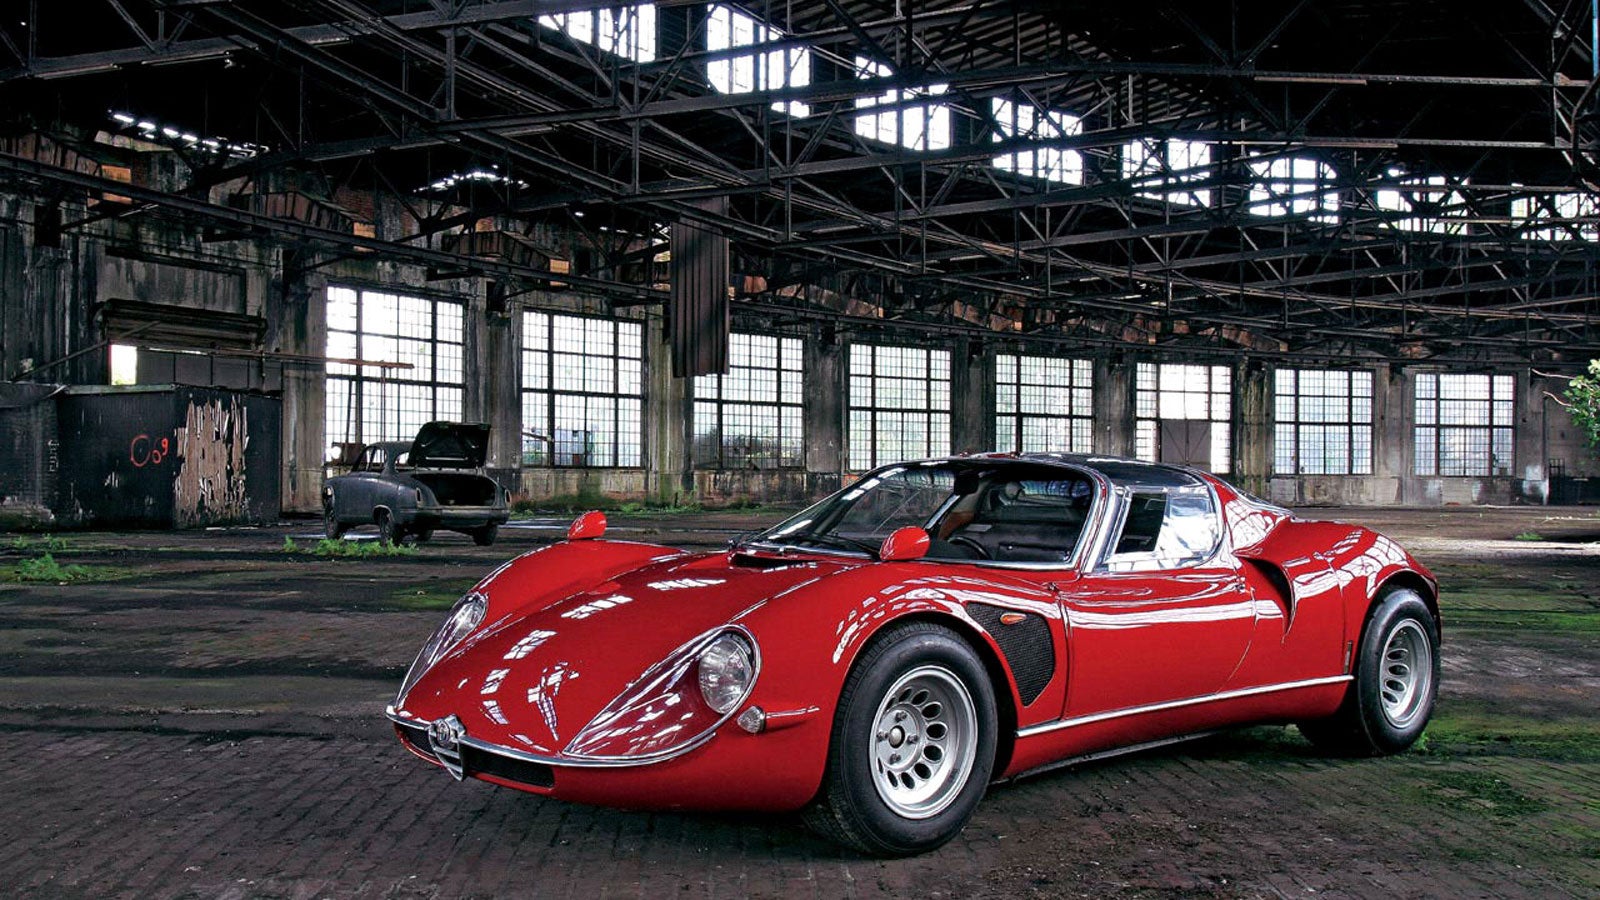 These Are the Best-Looking Cars Ever Made, According to You